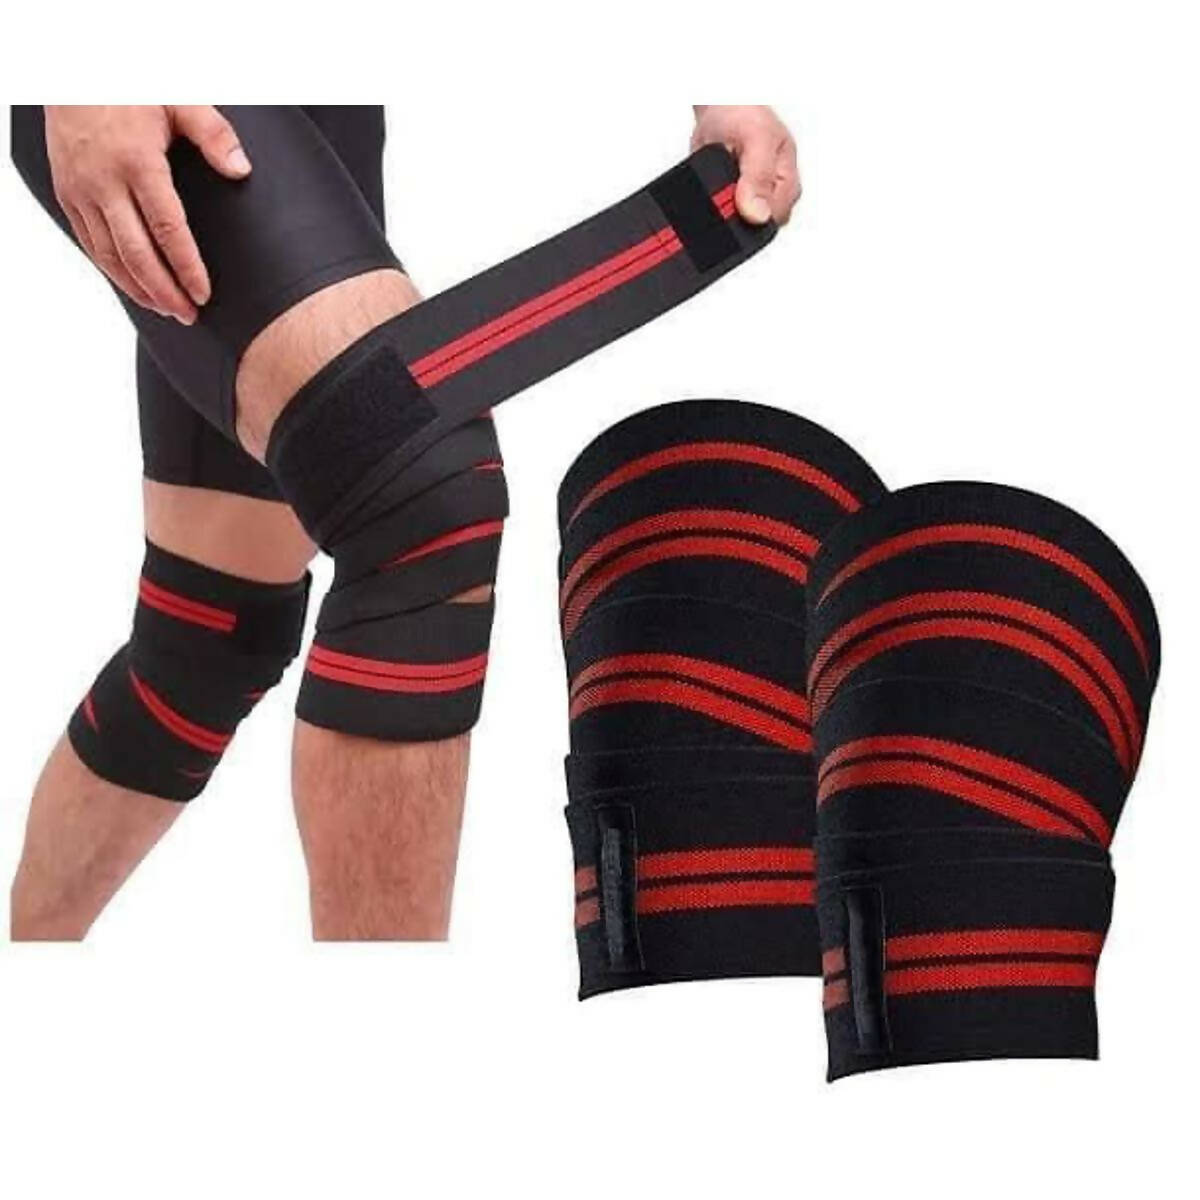 Elastic Bandage Sport Knee Support Strap Guard Protector For Ankle Leg Wrist Wrap